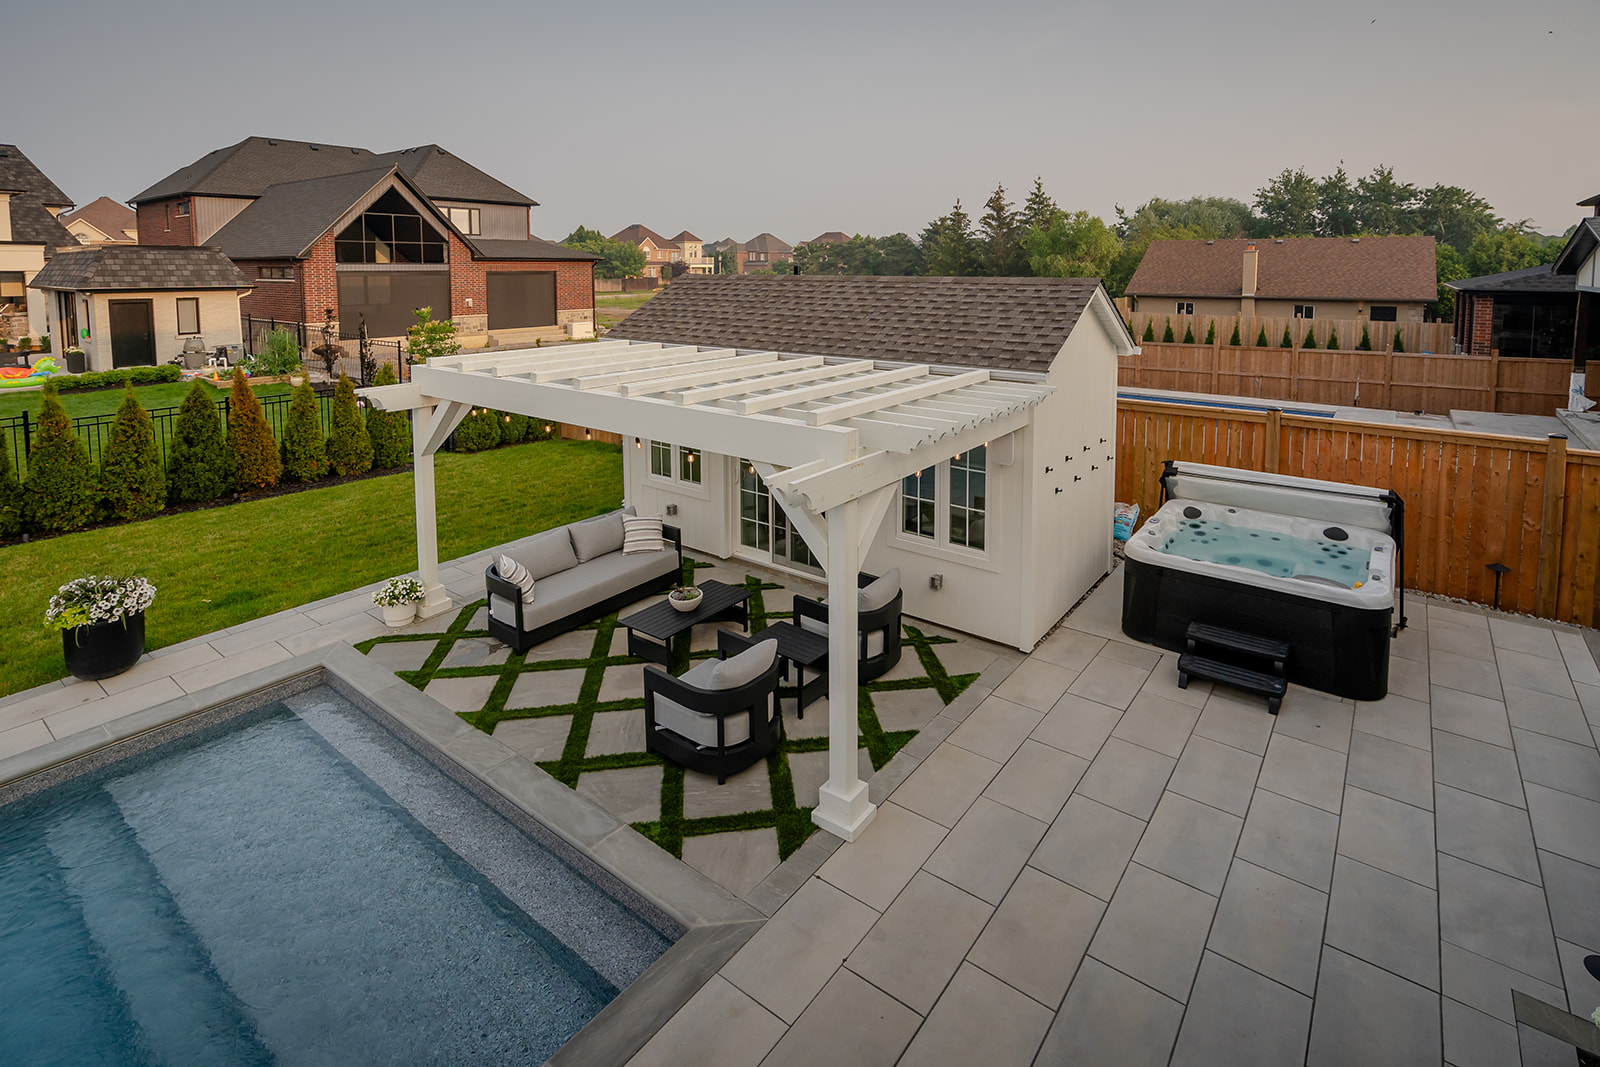 An outdoor seating area underneath a gazebo with a hot tub on the side.